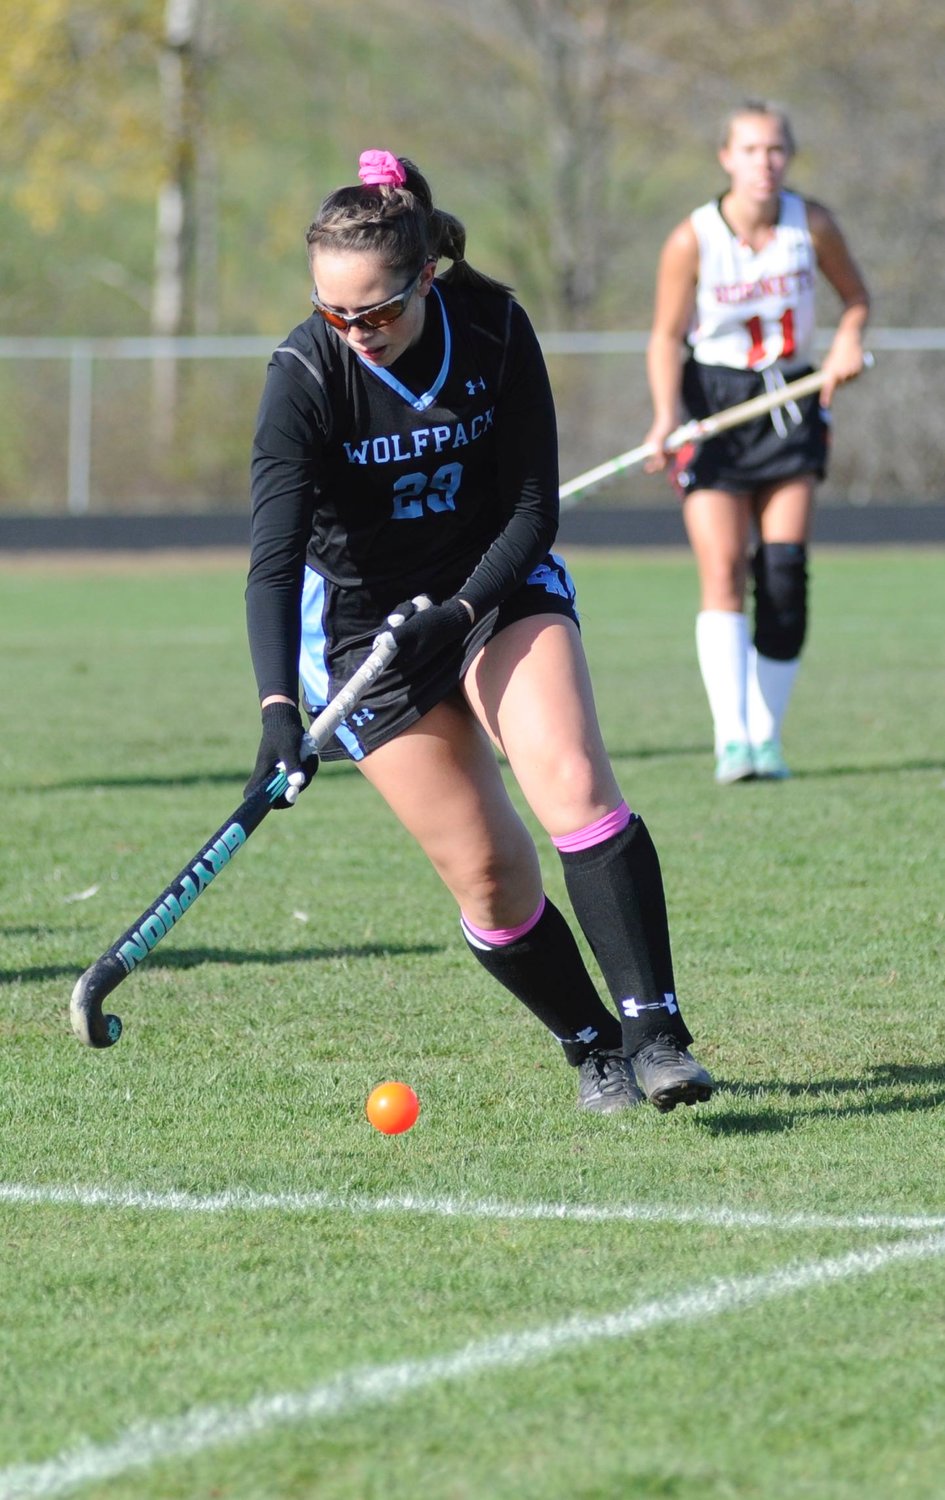 In control. Wilkes Barre’s Mia Manganello-Czapla moves the ball upfield. Honesdale’s Leah Krol, who scored the Hornets' second goal, is pictured in the background.